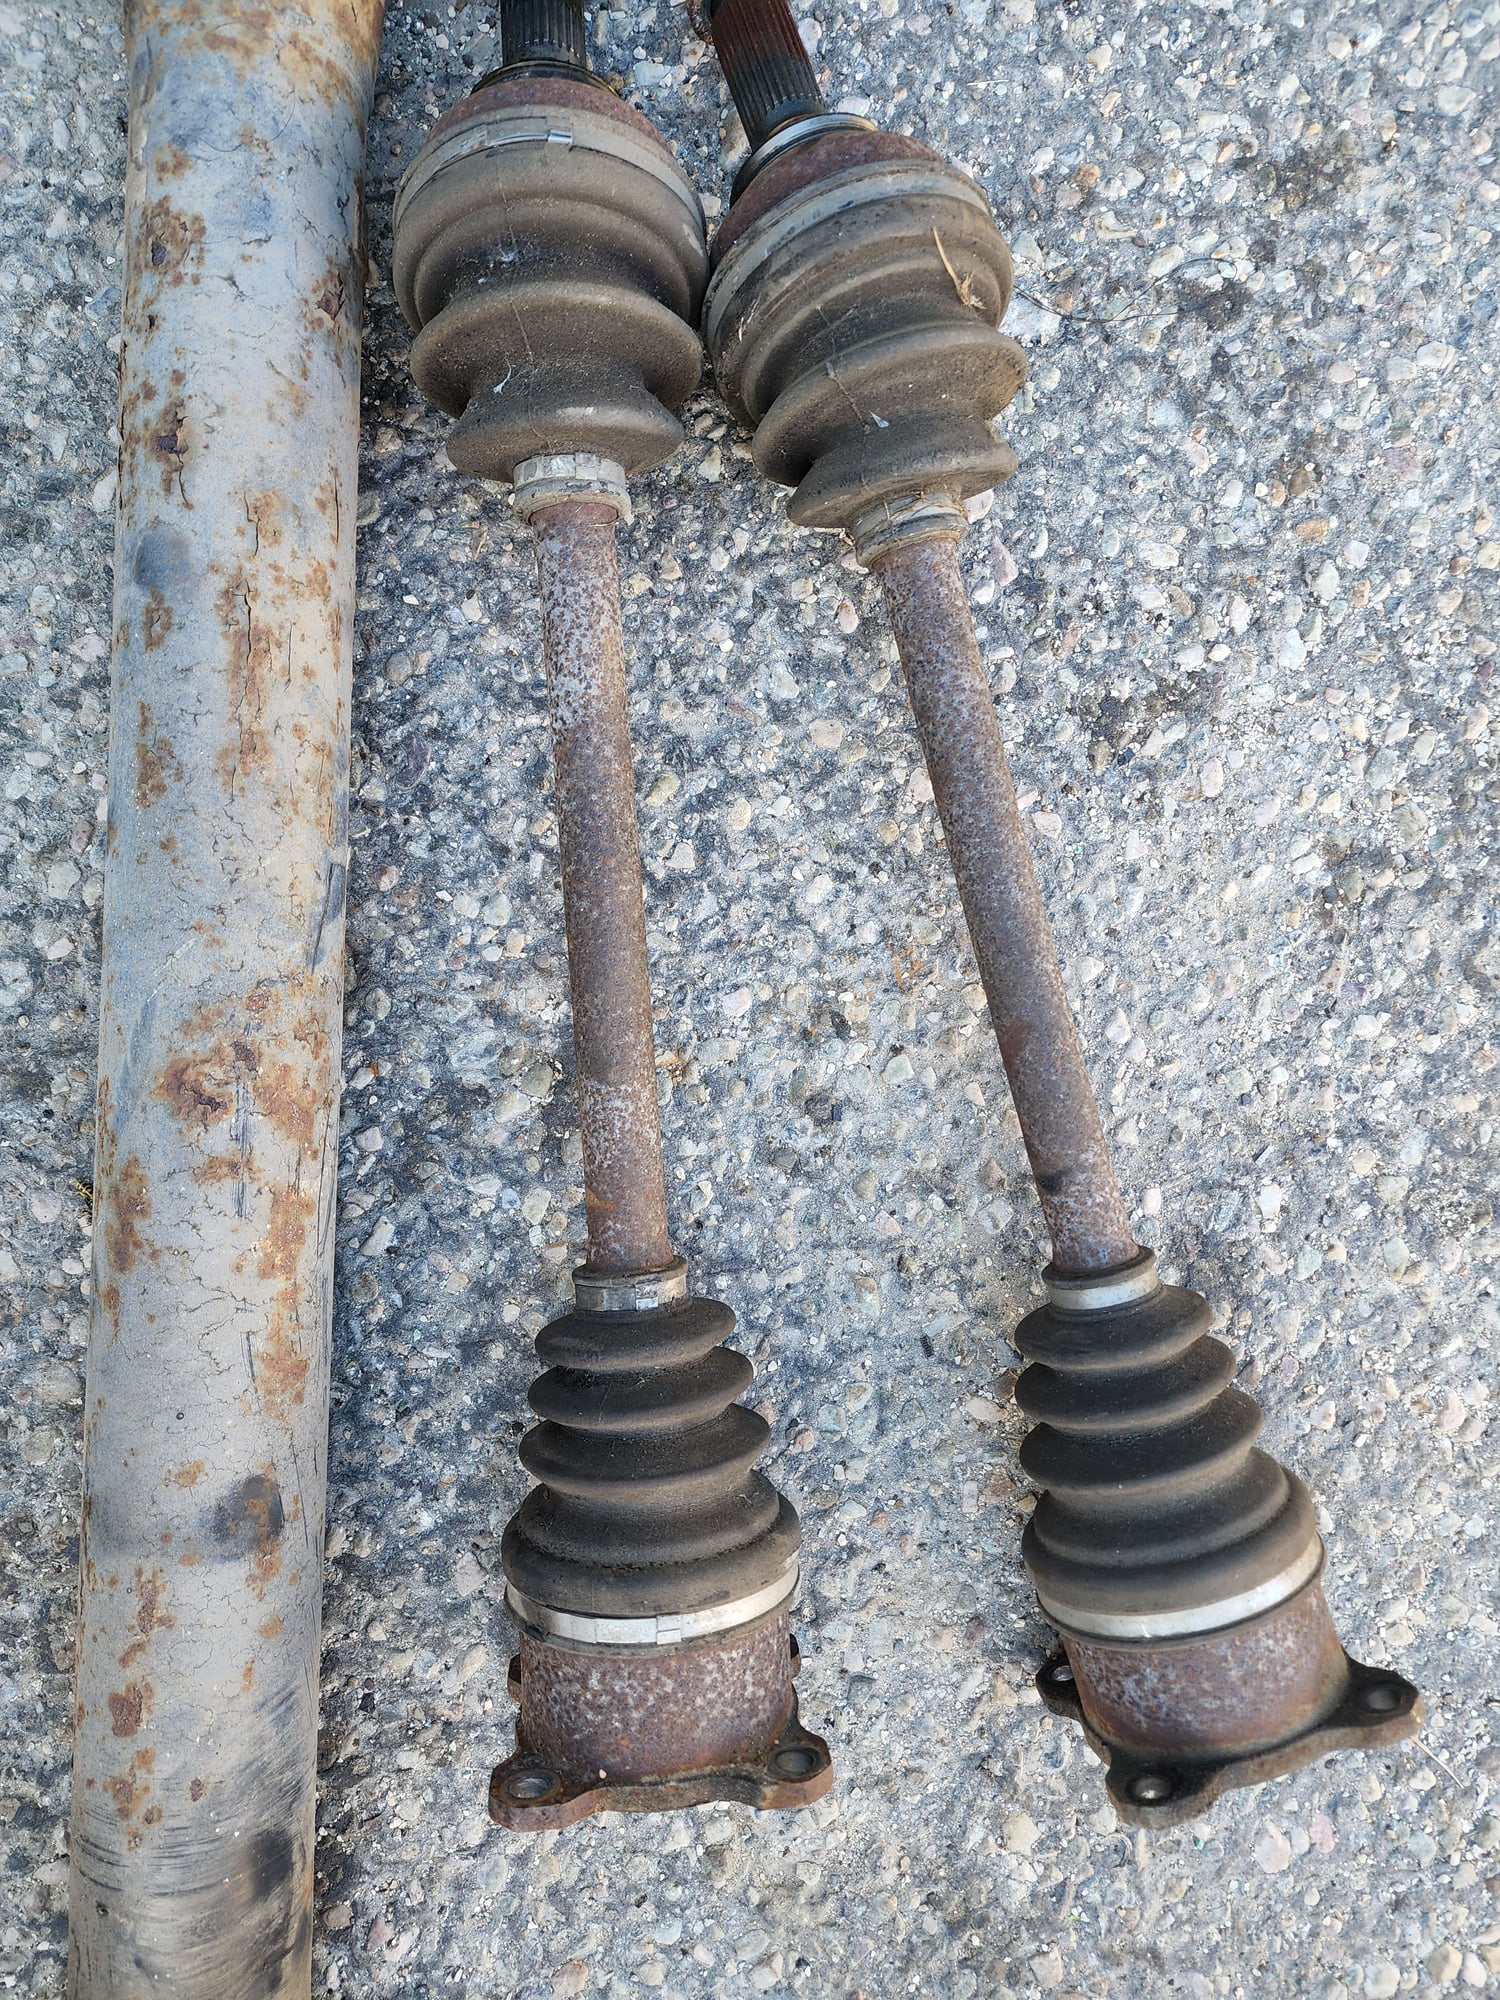 Drivetrain - S4 clutch type turbo diff  and drive shaft - Used - 1986 to 1991 Mazda RX-7 - Brigham City, UT 84302, United States